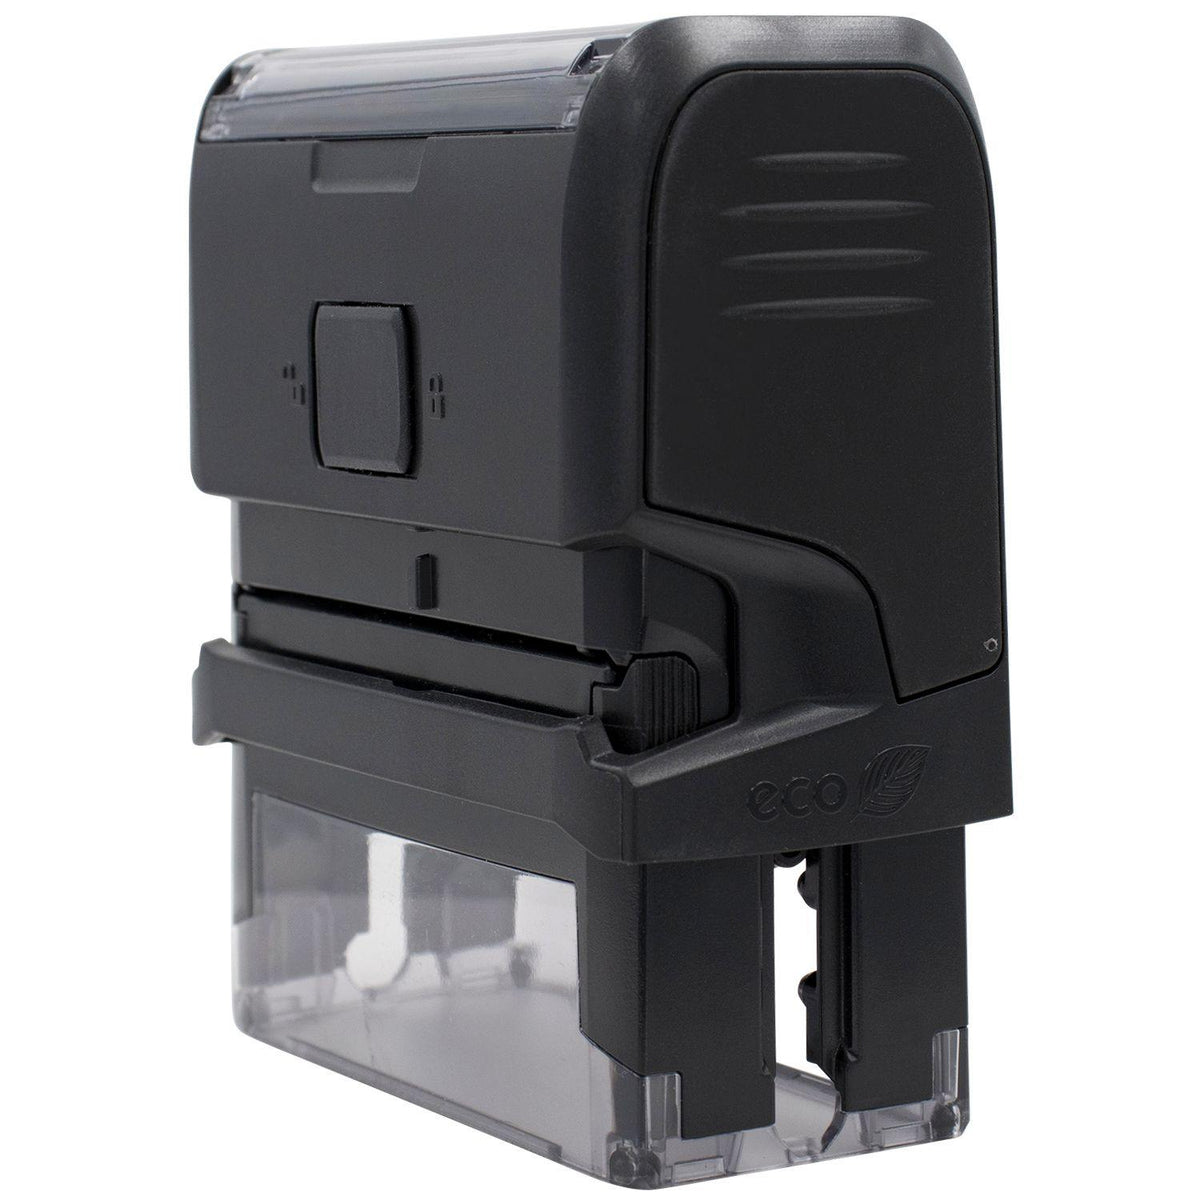 Large Self-Inking Narrow Benefits Assigned Stamp - Engineer Seal Stamps - Brand_Trodat, Impression Size_Large, Stamp Type_Self-Inking Stamp, Type of Use_Medical Office